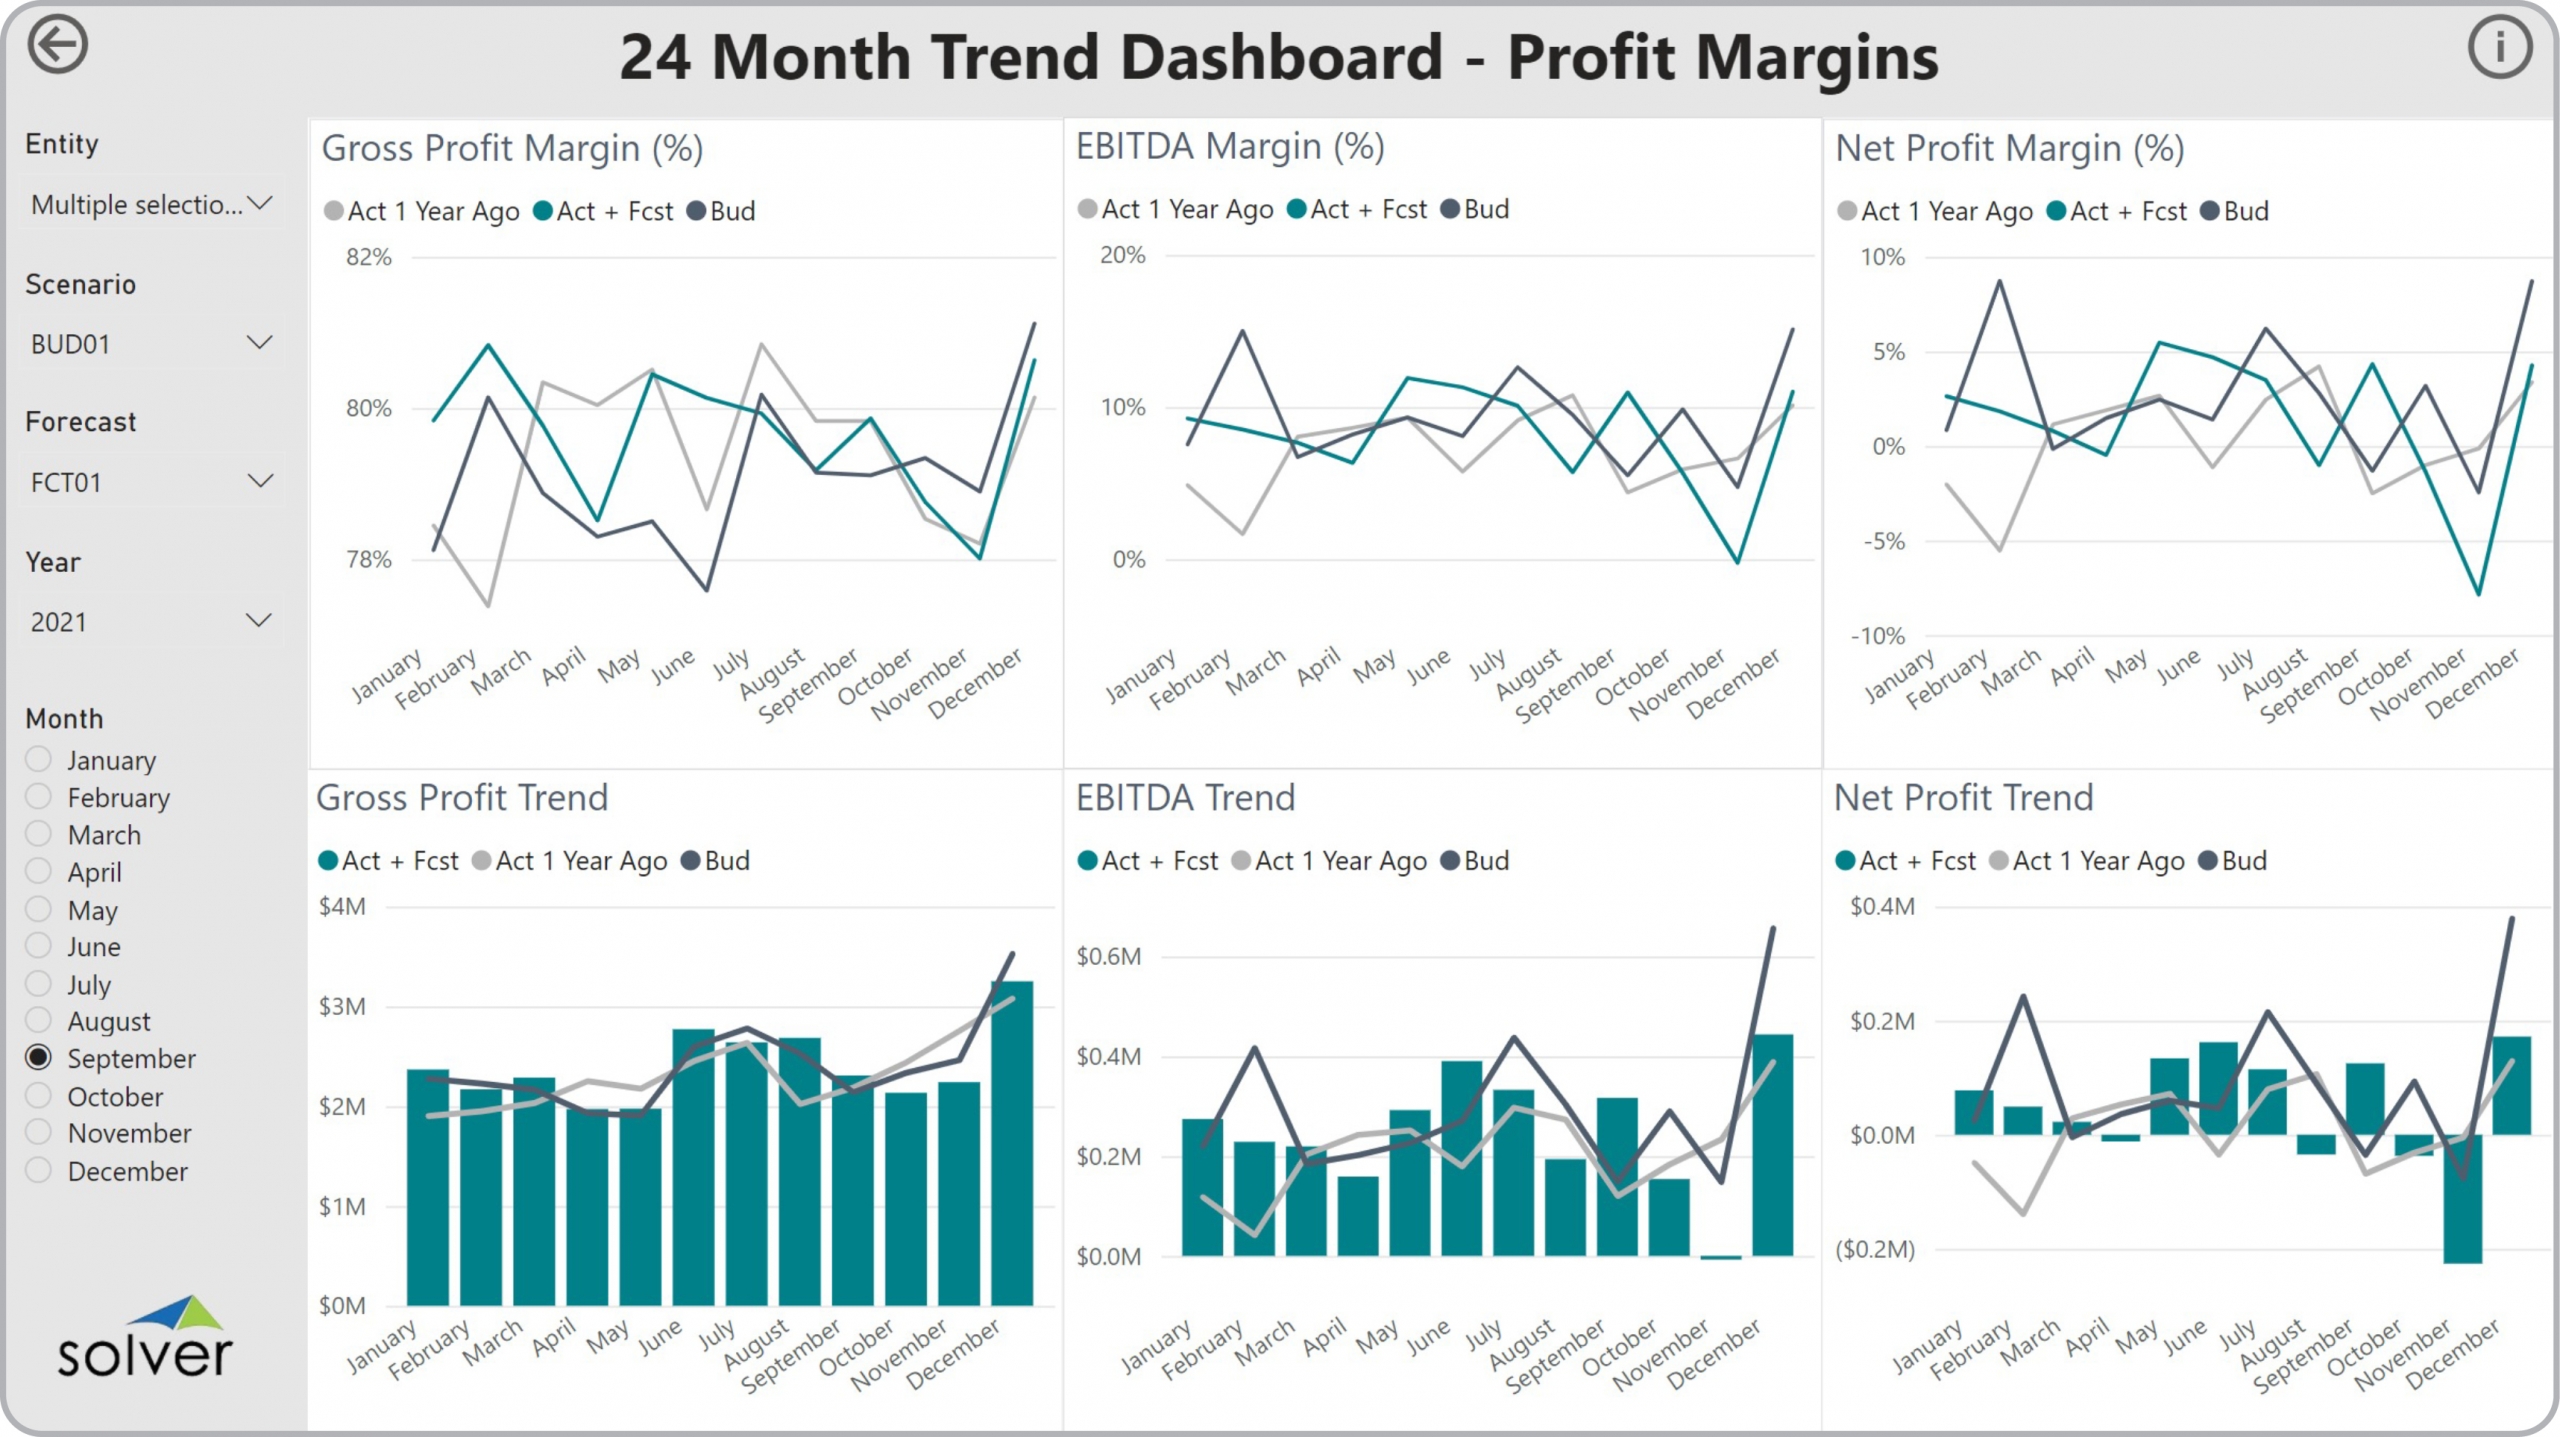 Example of a 24 Month Profitability Trend Dashboard to Streamline the Monthly Reporting Process